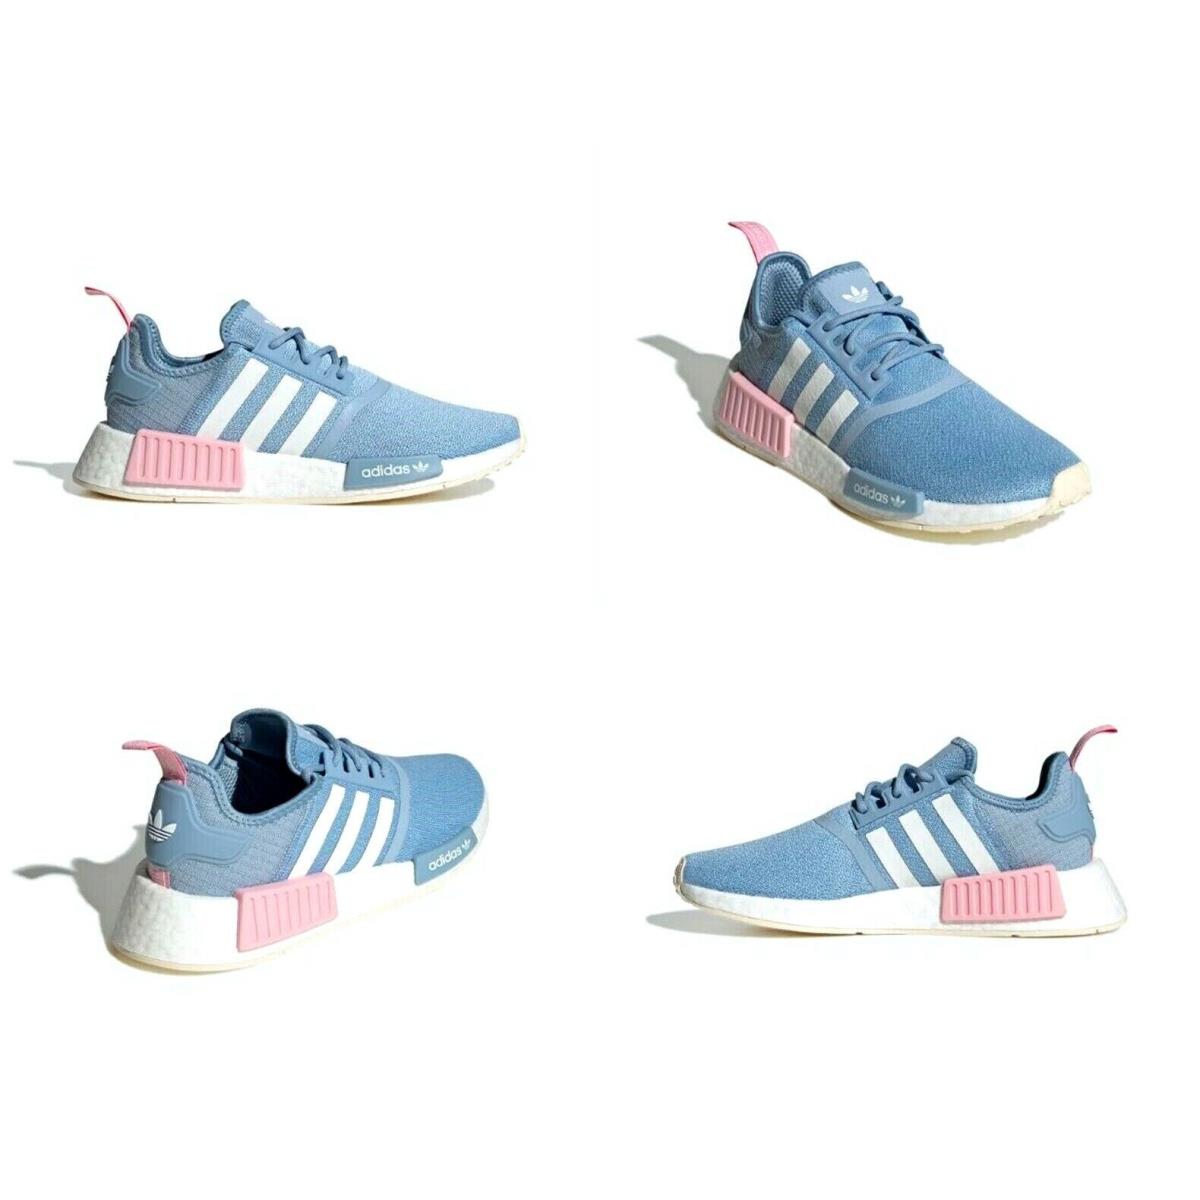 Adidas Nmd R1 W Boost Blue / Pink / White Womens Size 7.5 US GV9185